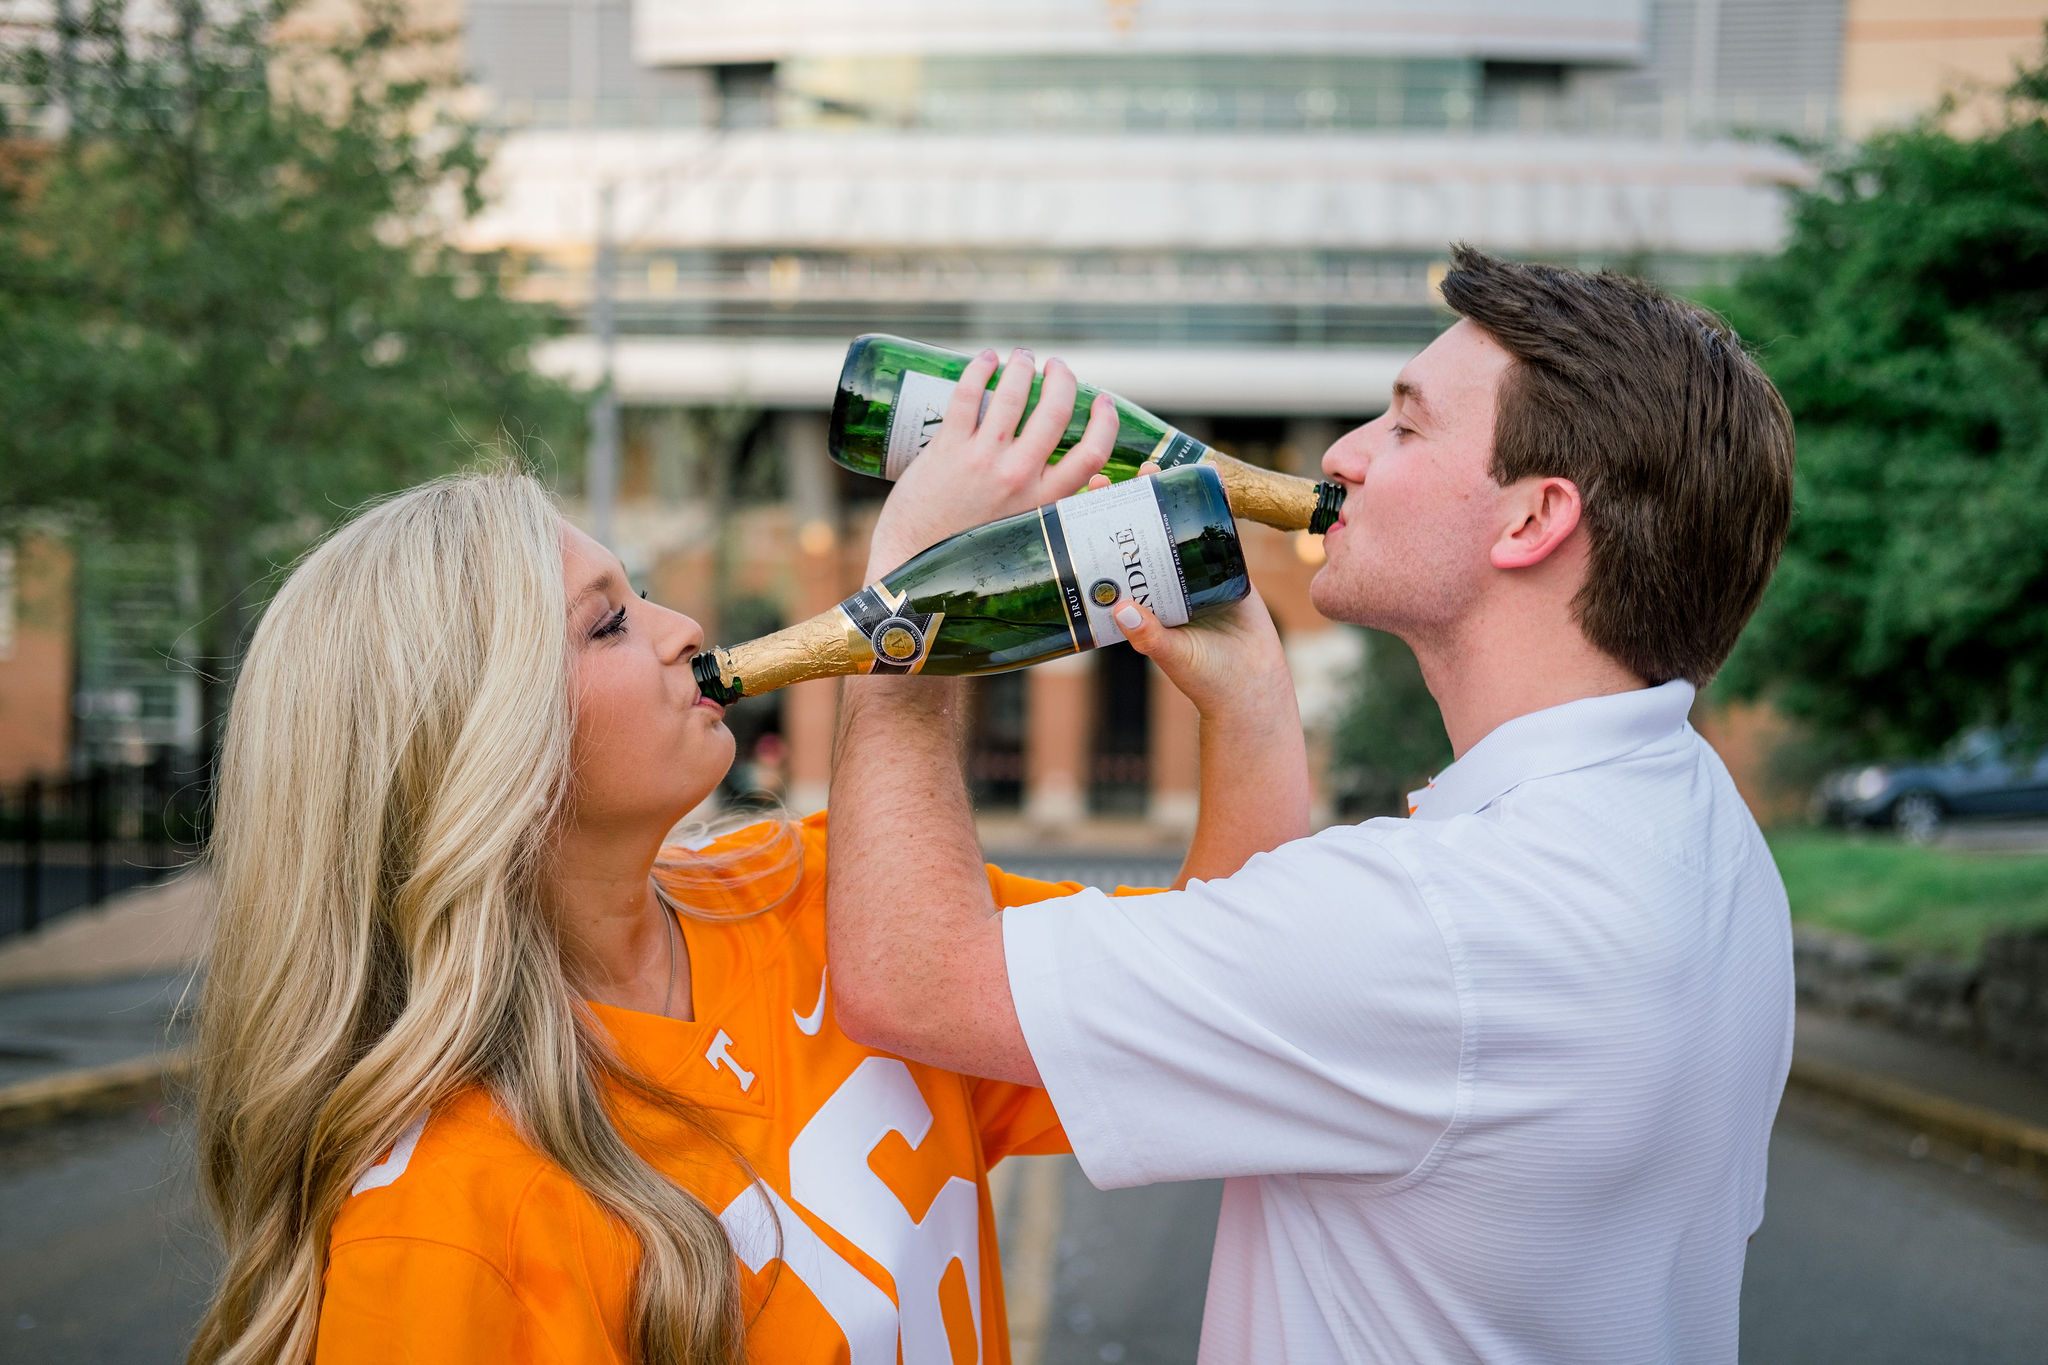 man and woman celebrating recent college graduation drinking champagne together